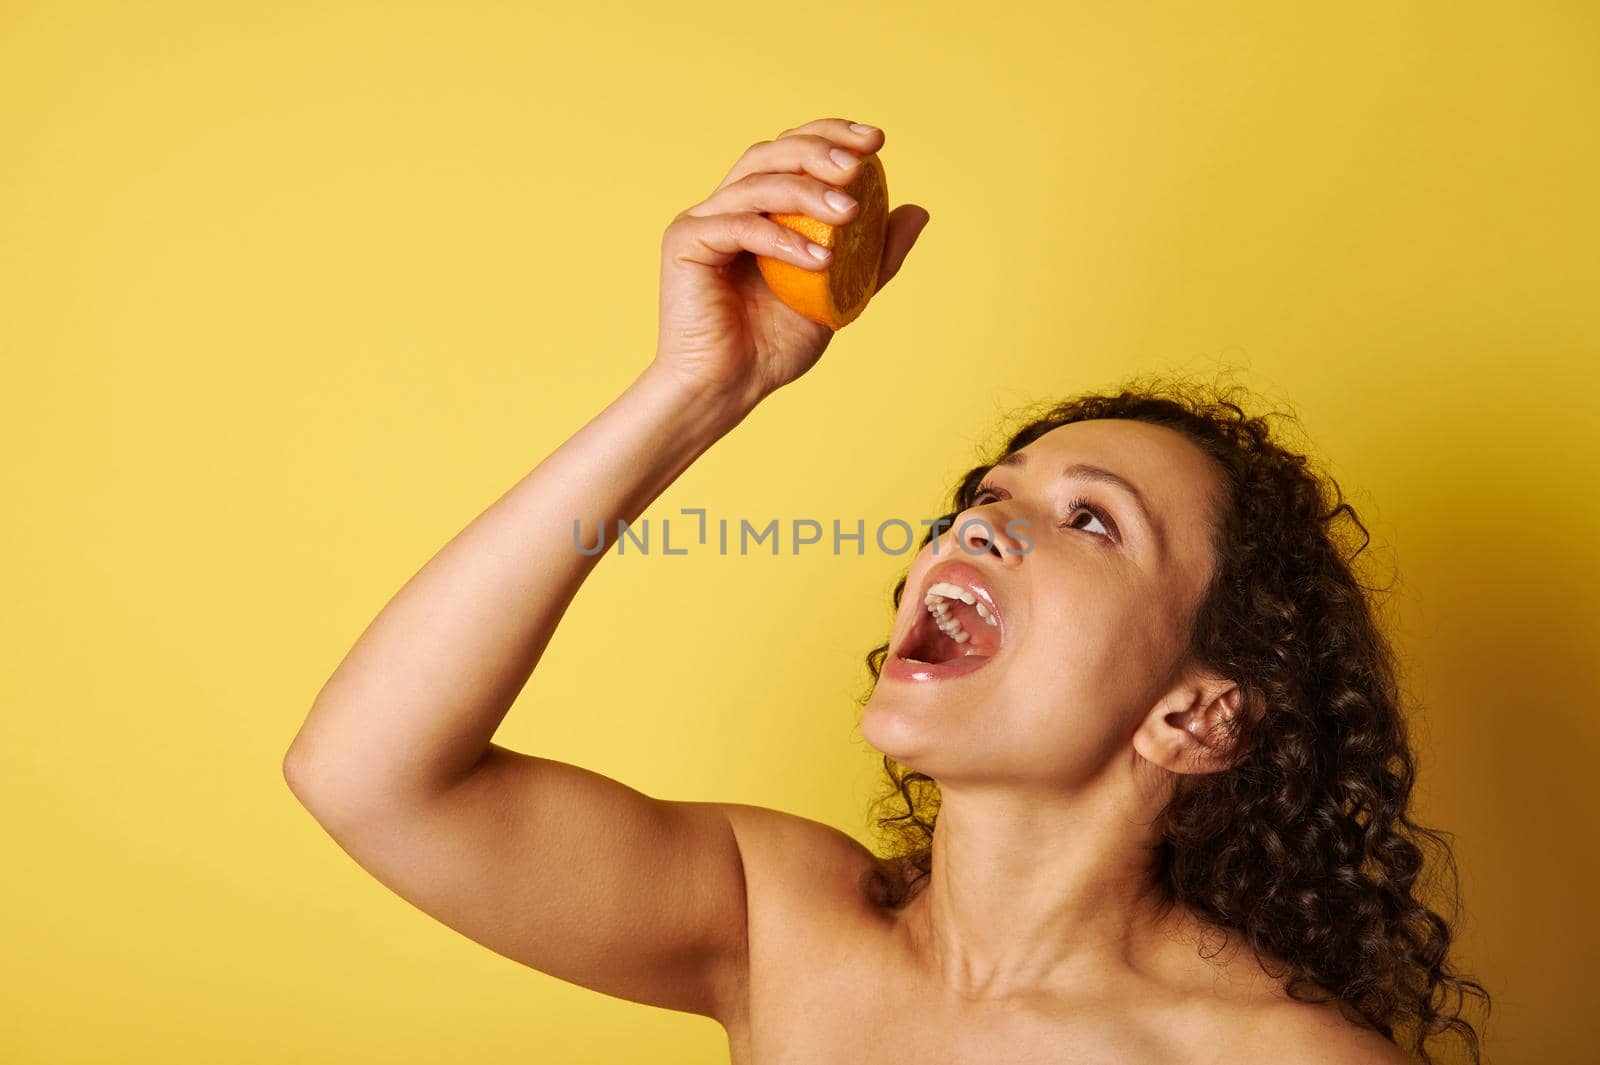 Closeup portrait of a beautiful half naked woman squeezing orange juice into her mouth by artgf